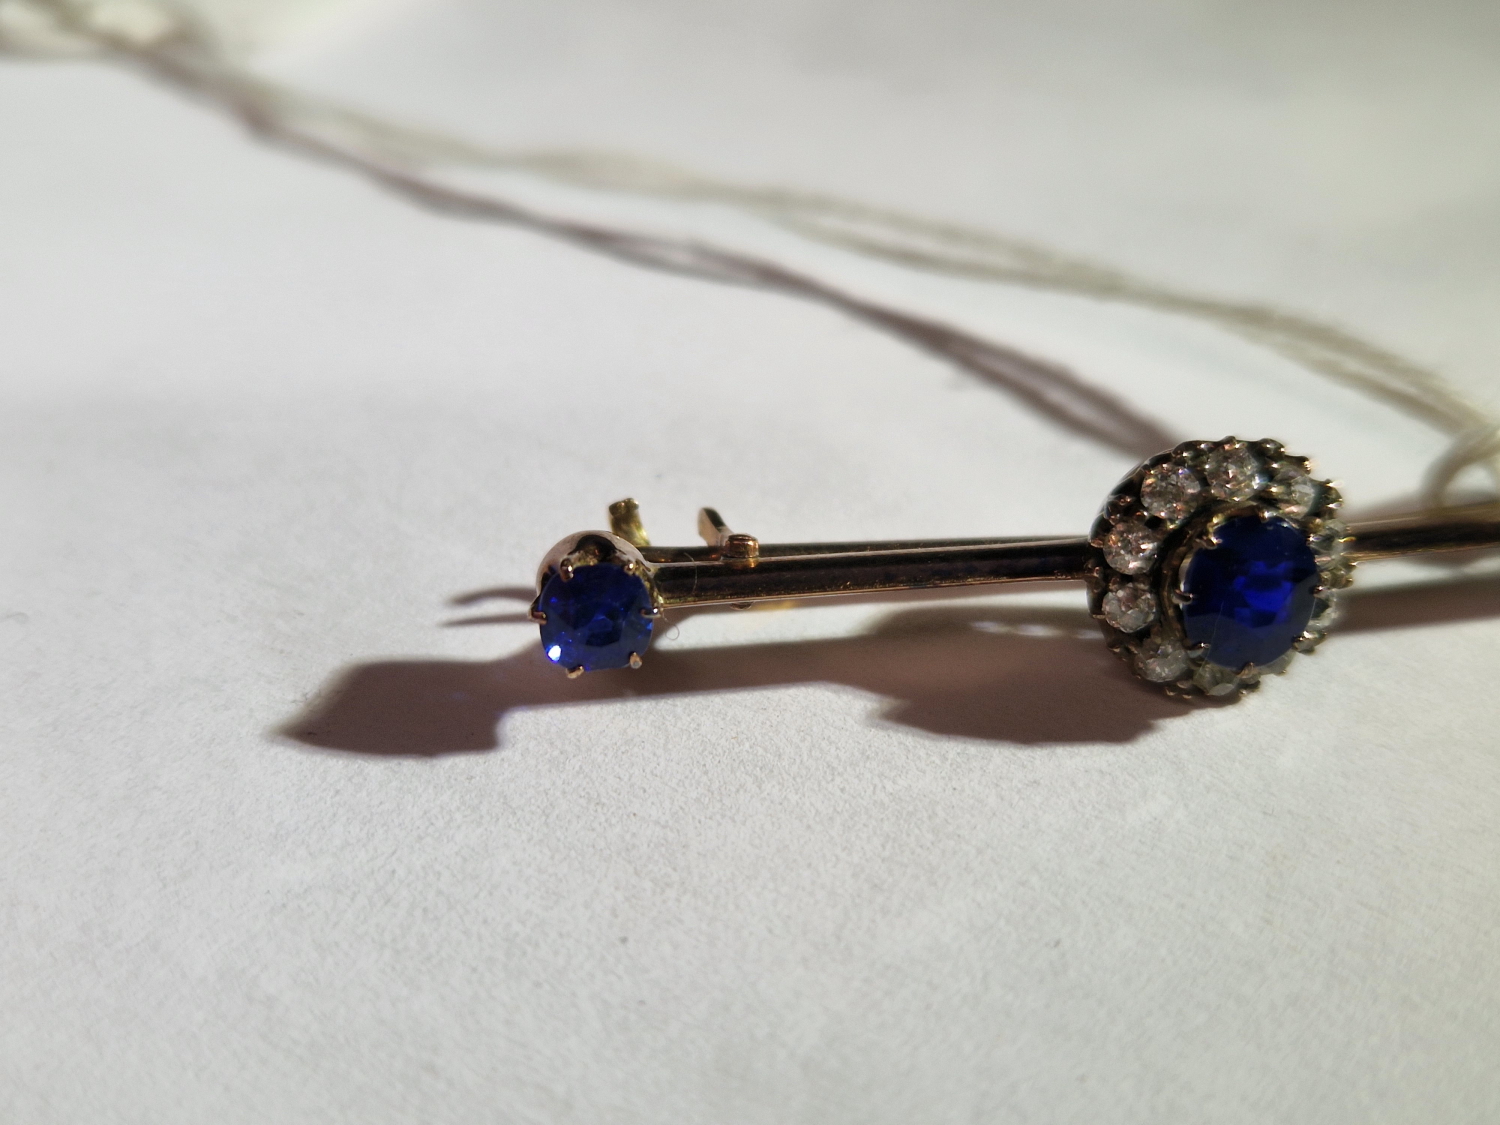 AN ANTIQUE SAPPHIRE AND DIAMOND BRA BROOCH. UNHALLMARKED, ASSESSED AS 9ct GOLD. LENGTH 4.6cms. - Image 6 of 7